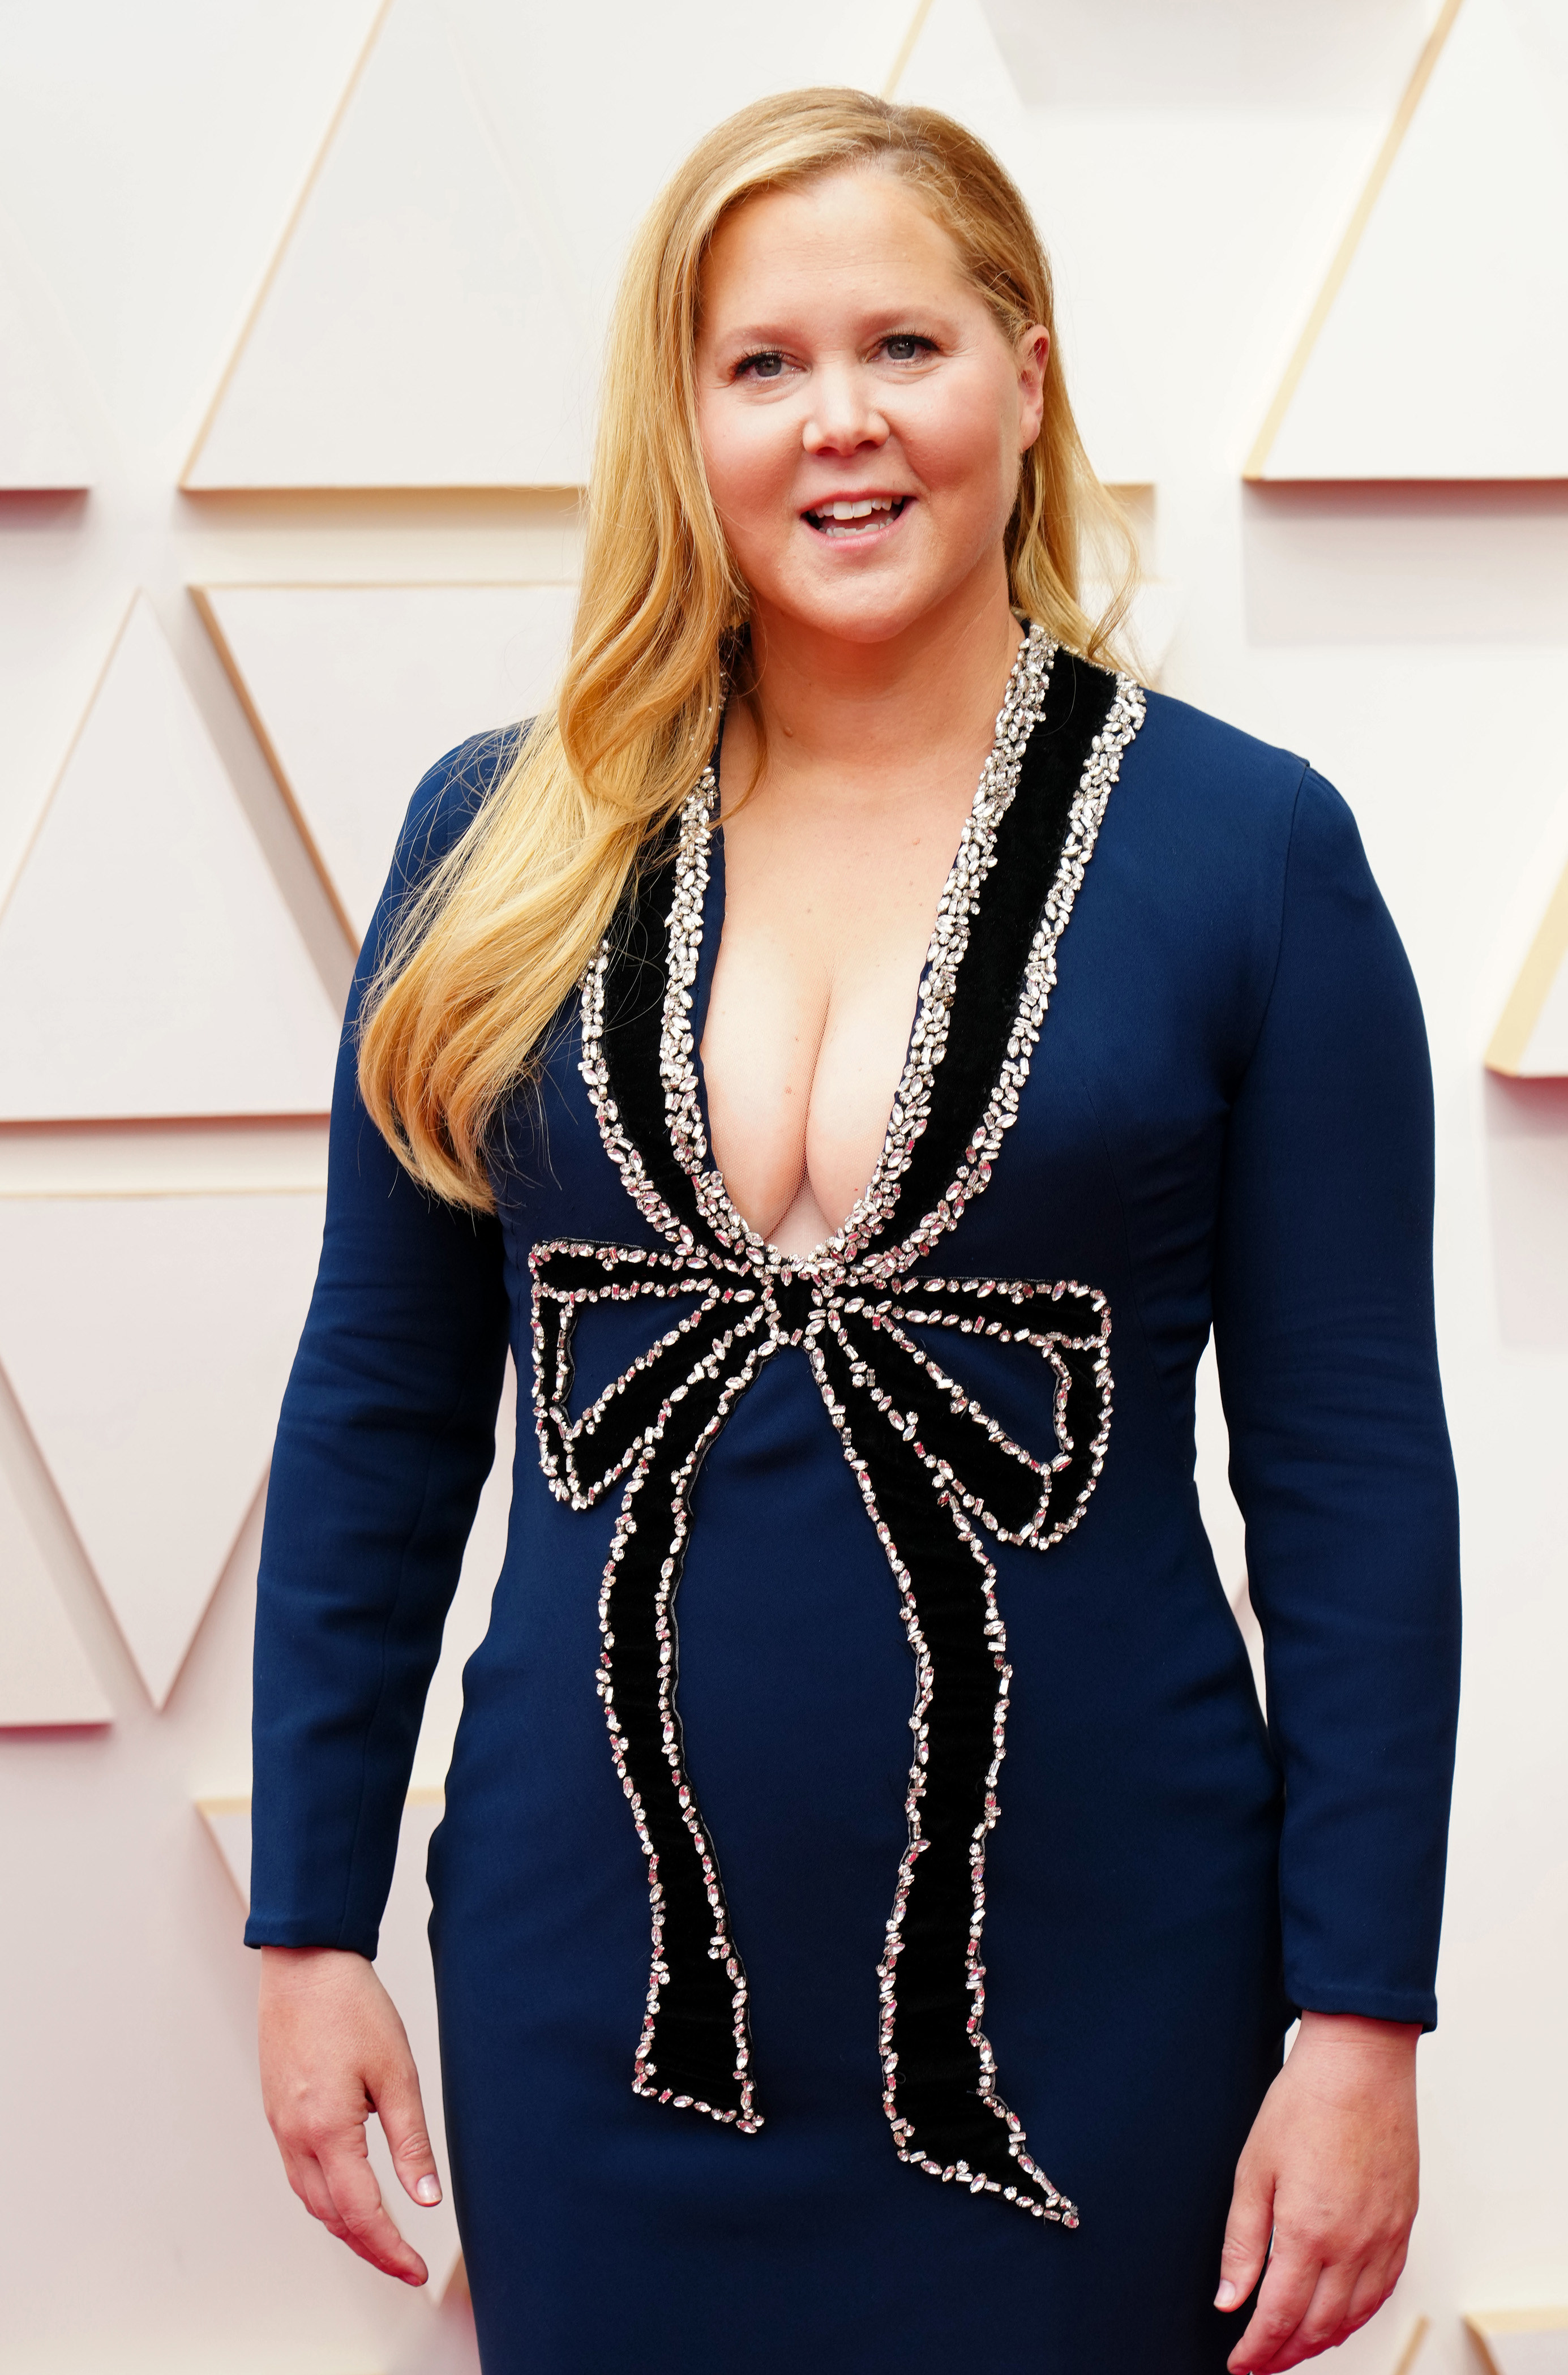 Amy posing on the Oscars red carpet in a long-sleeved form-fitting dress with plunging neckline